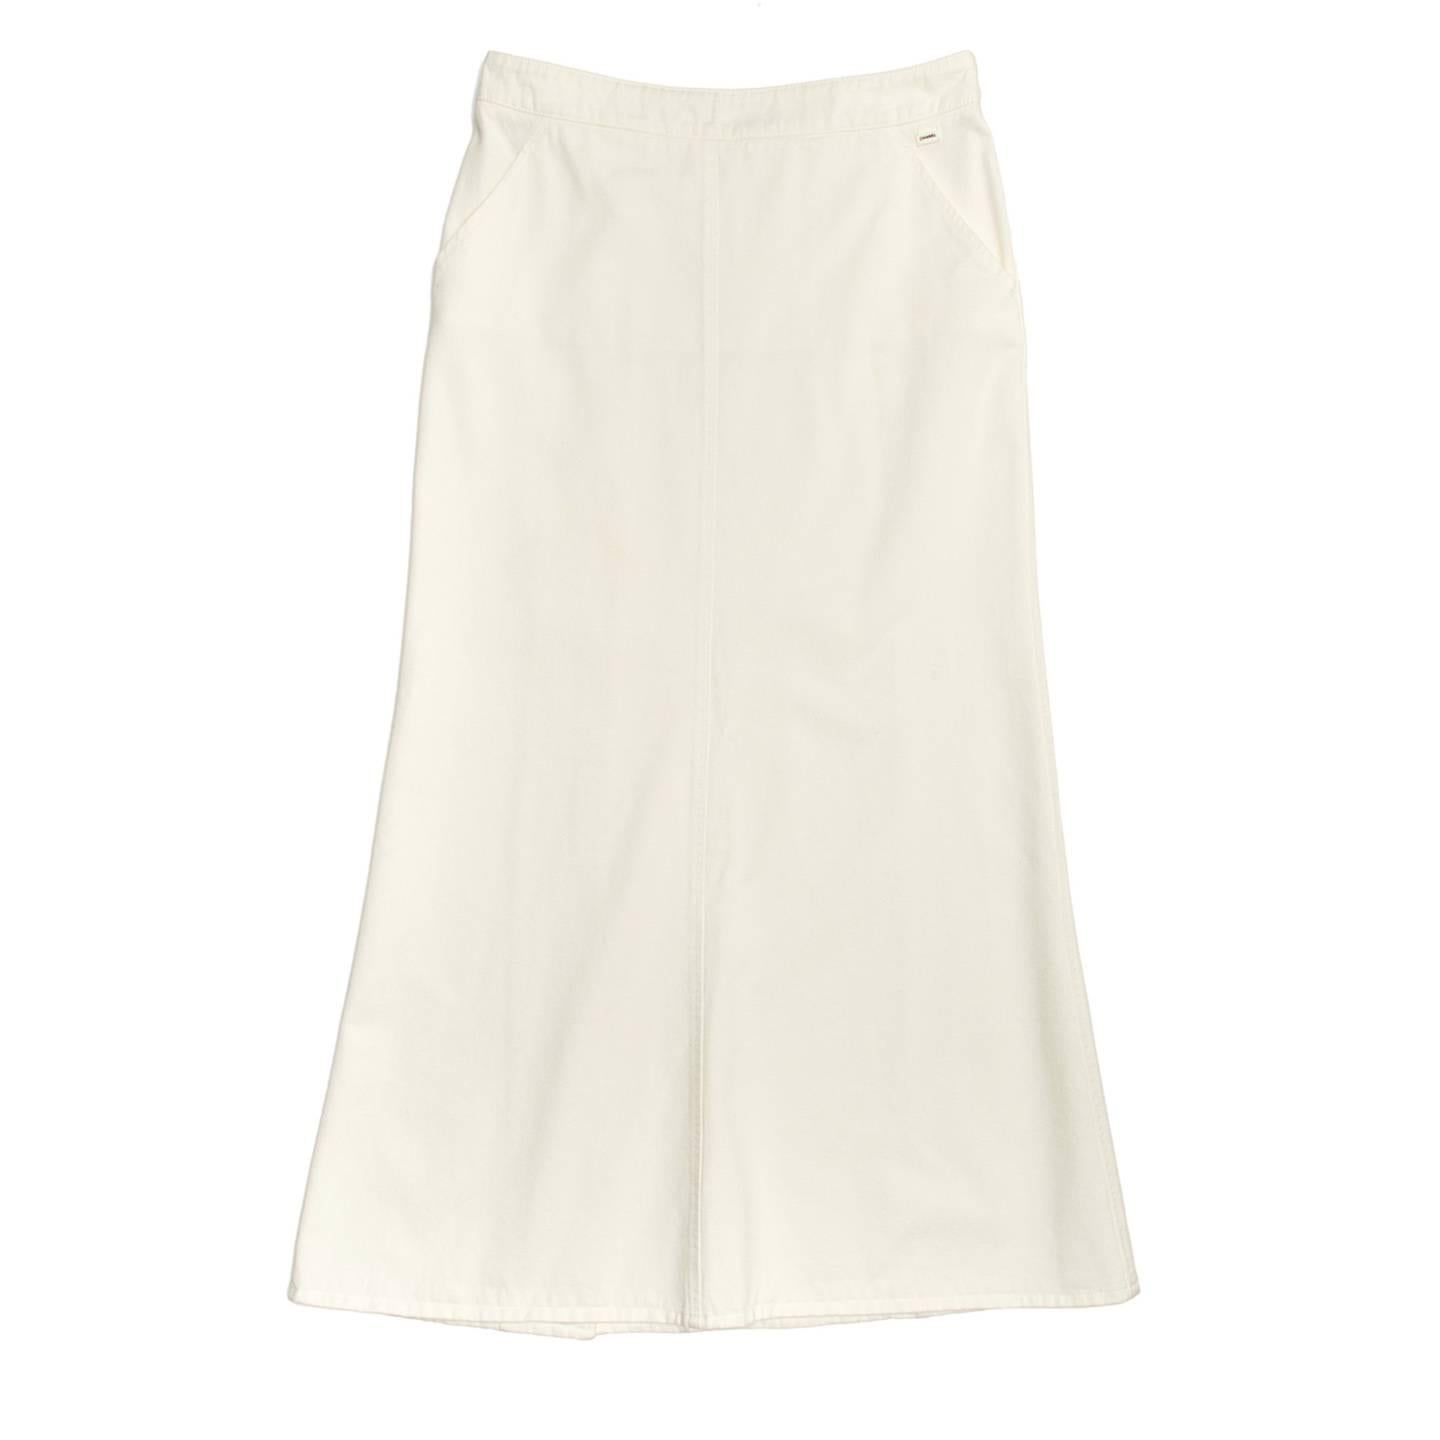 White denim long skirt with slash pockets at front and an off centered back opening that creates a slit. The back is enriched by big round self-fabric buttons with metal eyelets.

Size  44 French sizing

Condition  Excellent